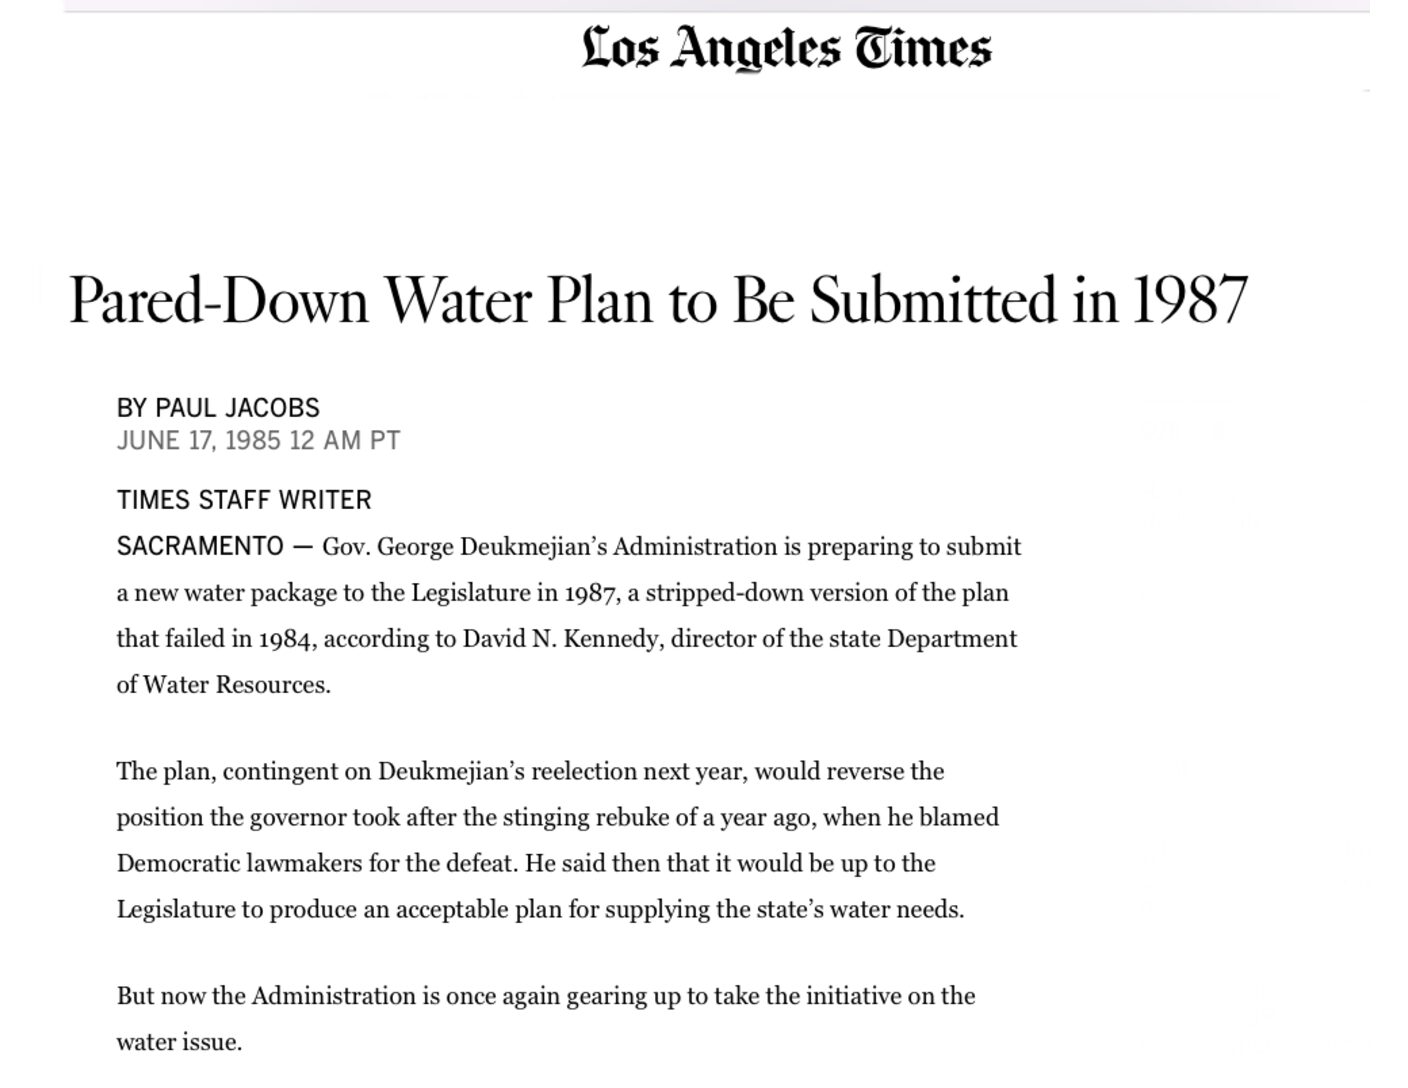 Pared-Down Water Plan to Be Submitted in 1987